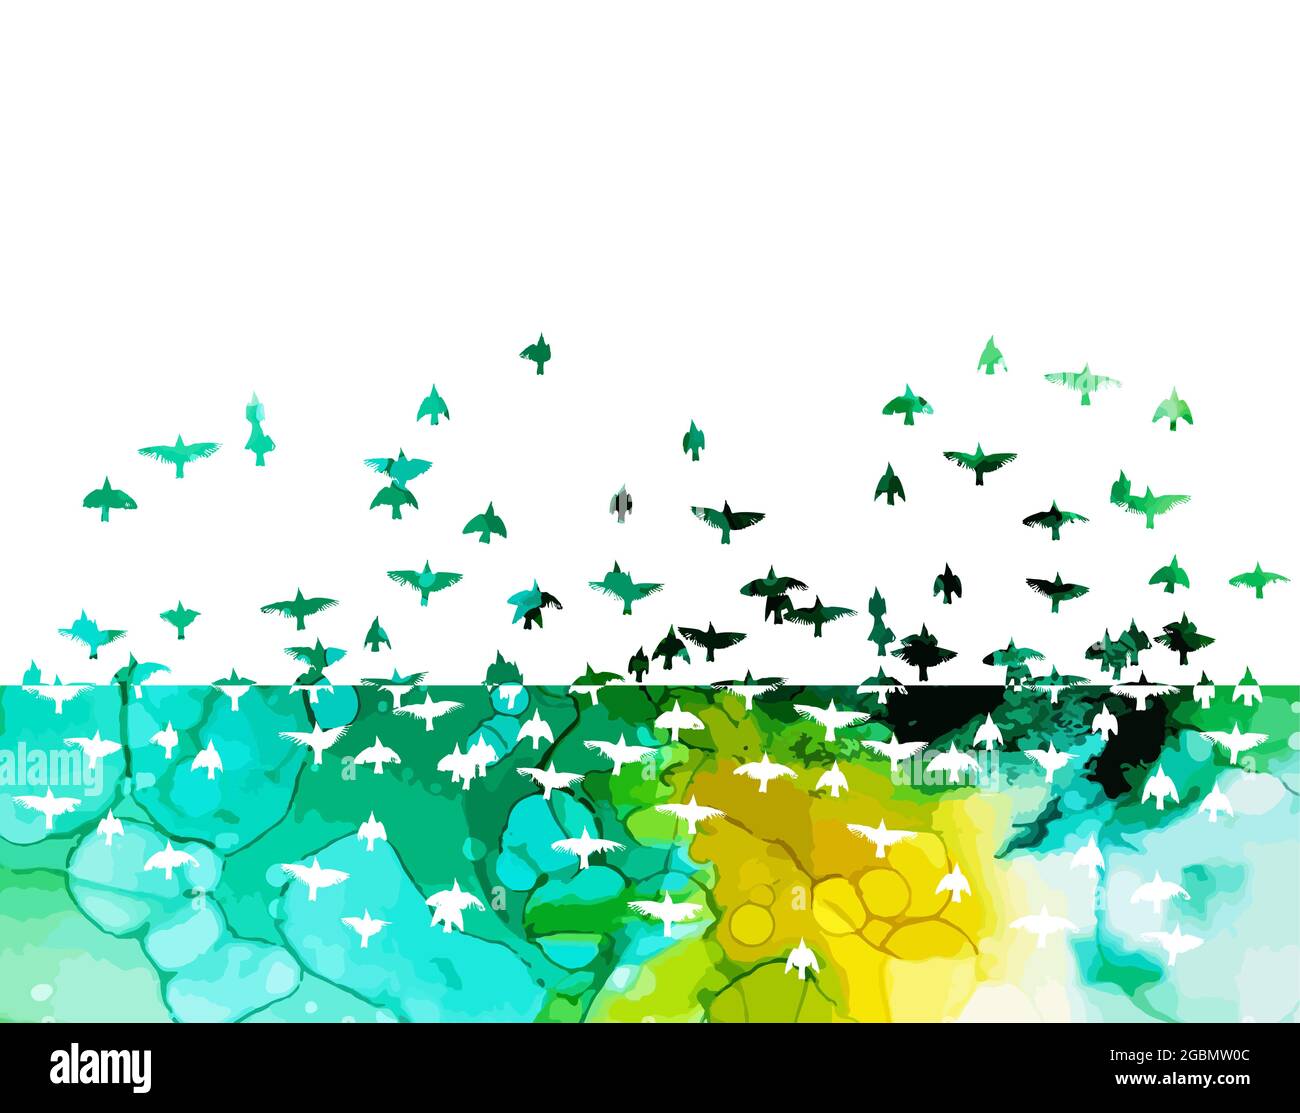 A Flock Of Blue Birds Vector Illustration Stock Vector Image And Art Alamy